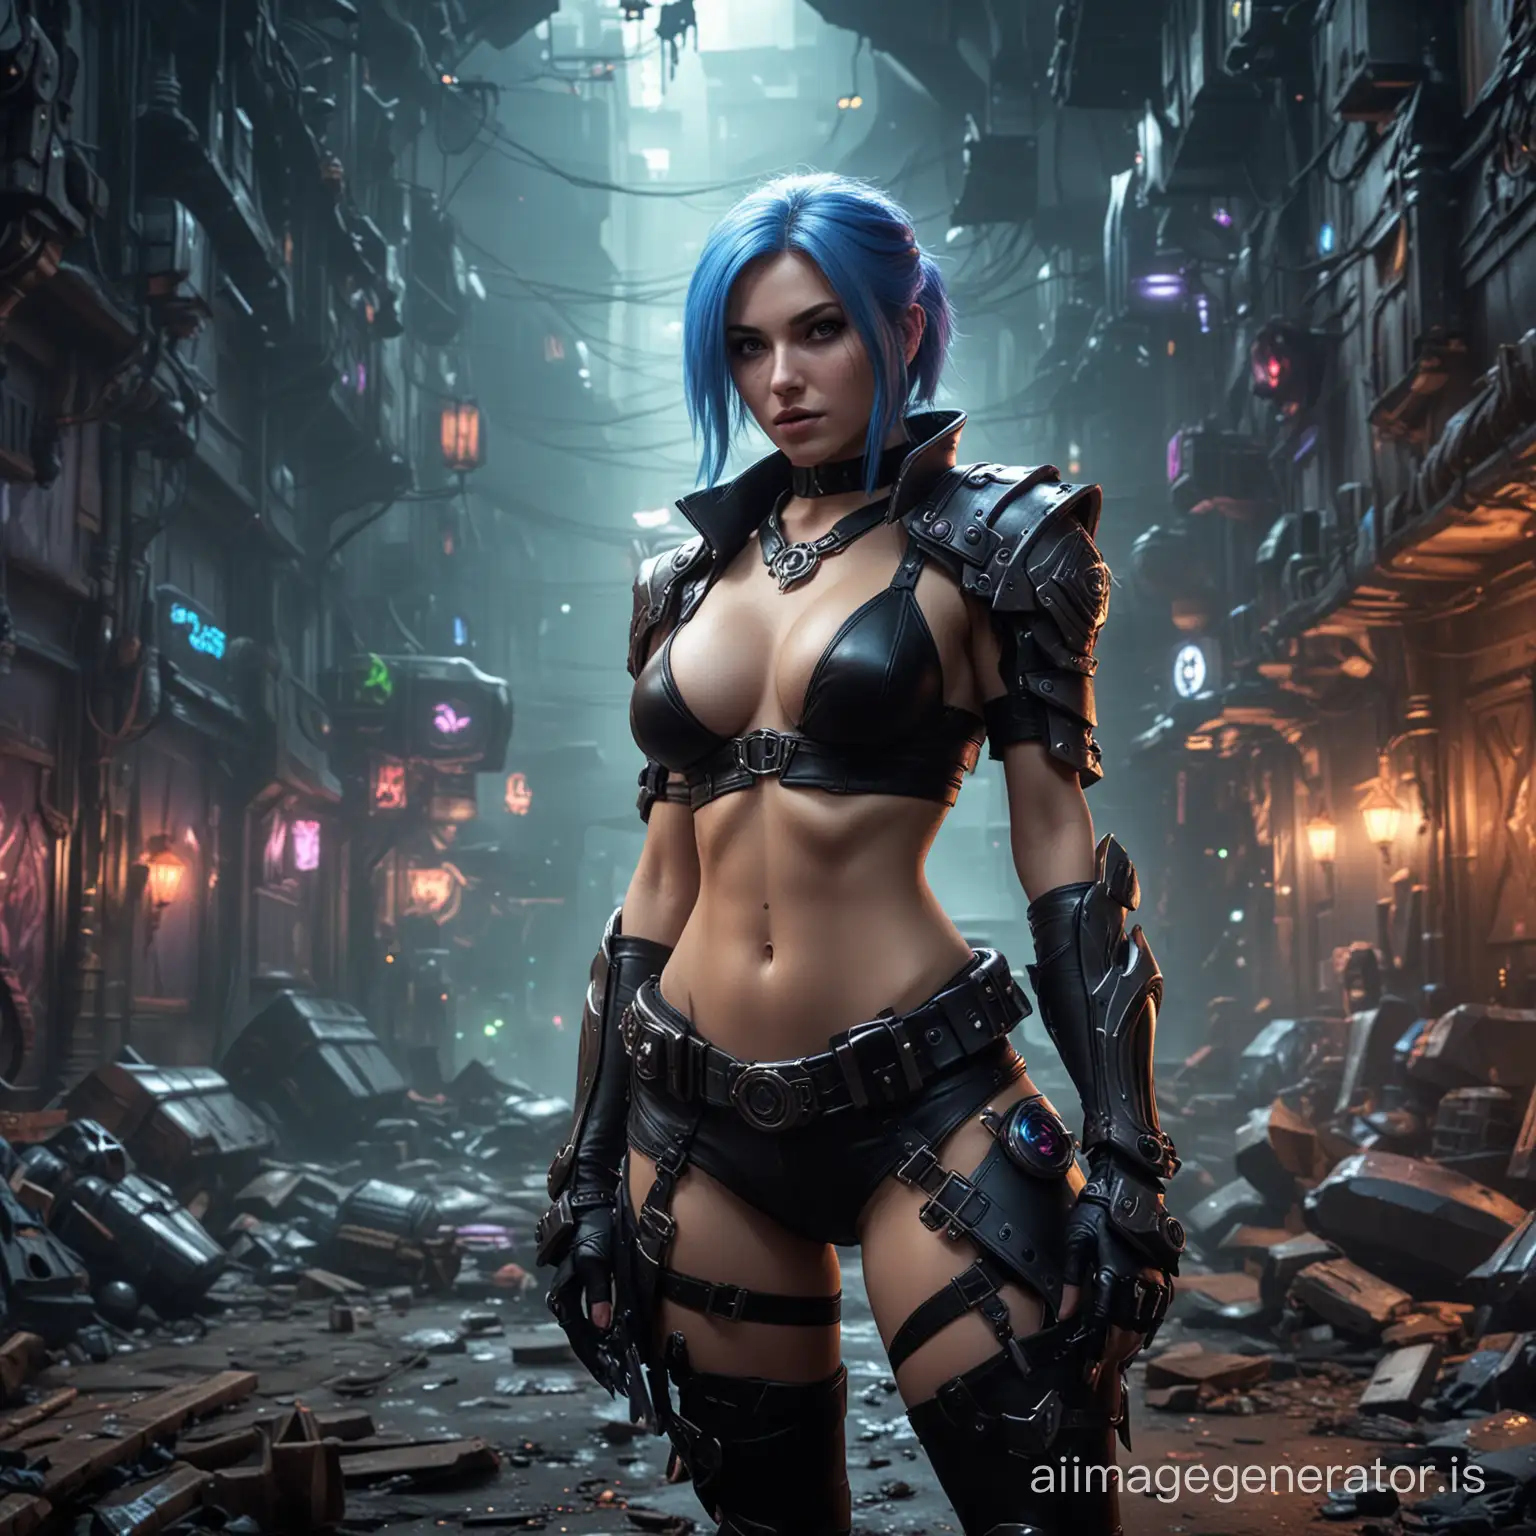 (erotic photo);(("League of Legends","Jinx"));neon lighting, Giger-style abandoned world location;(full body), dramatic, extreme composition, realism, complex details, cinematic frame, lighting, photography lighting, ArtStation gallery, behance photography, professional photography, without stickers, UHD, flirty woman in leather, high-detail faces, group f/64